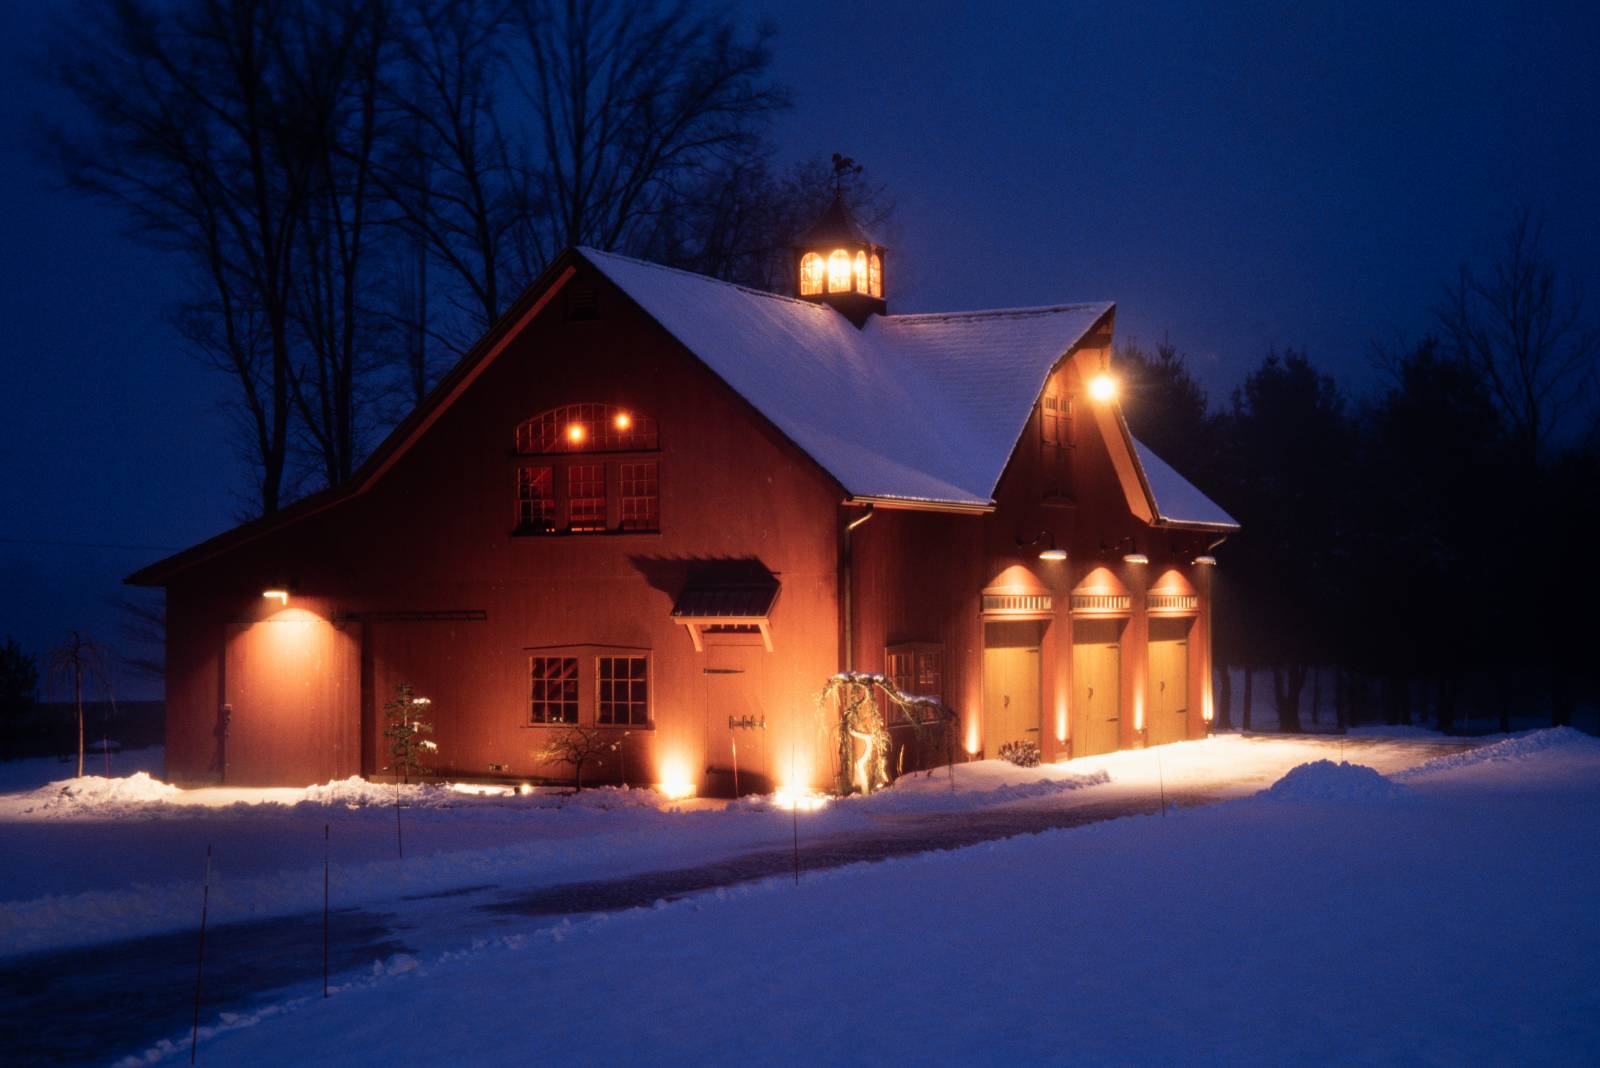 The Carriage Barn is a shining beacon of light during the snow squall as dusk turns to night